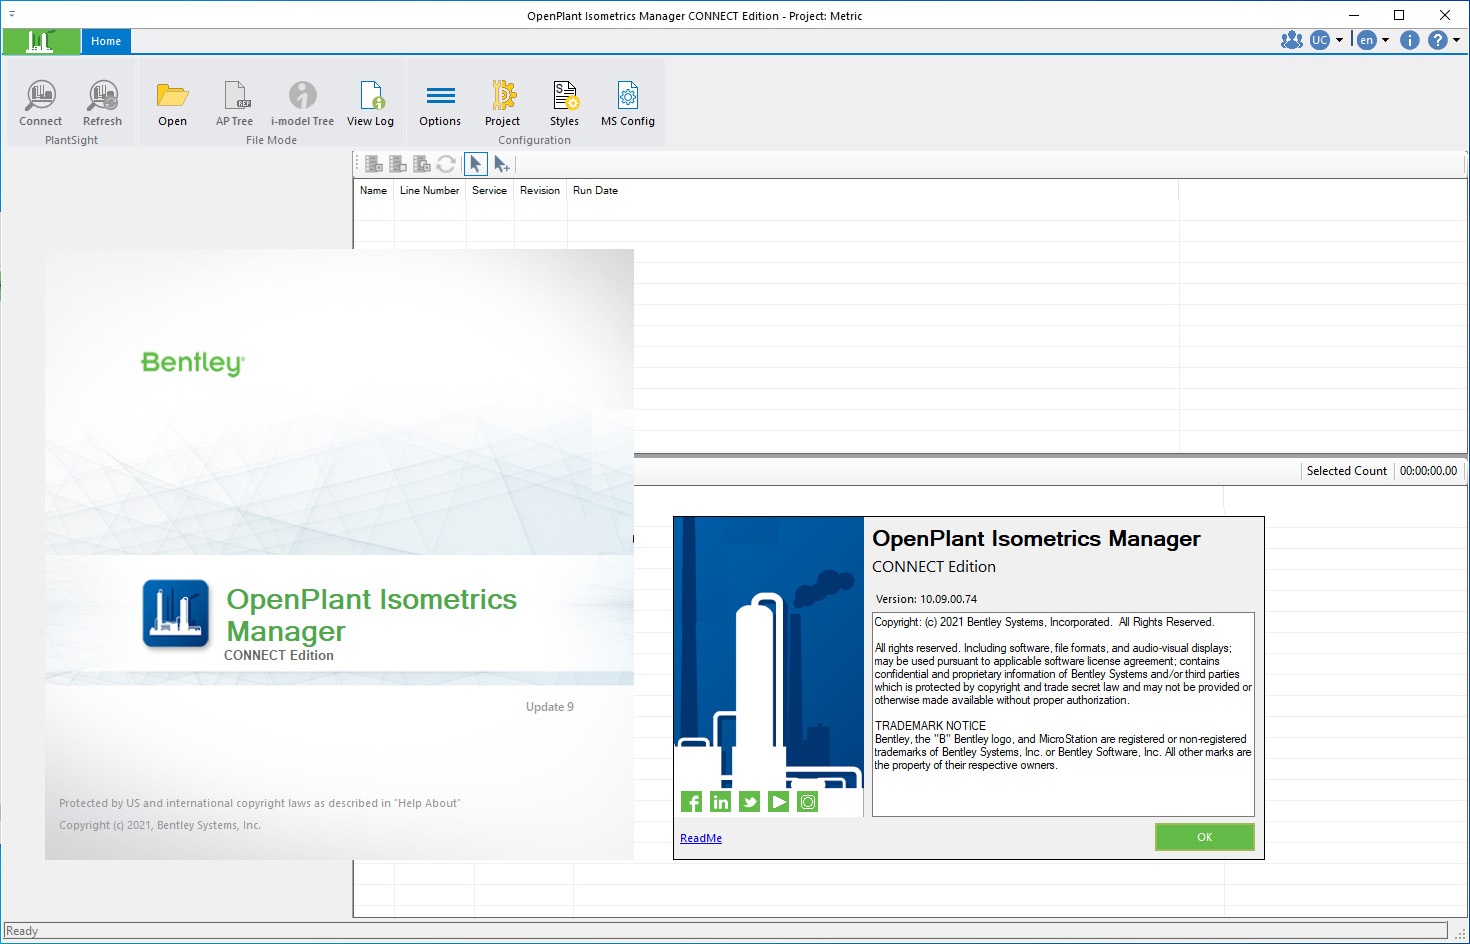 Working with Bentley OpenPlant Isometrics Manager CONNECT Edition 10.09.00.74 full